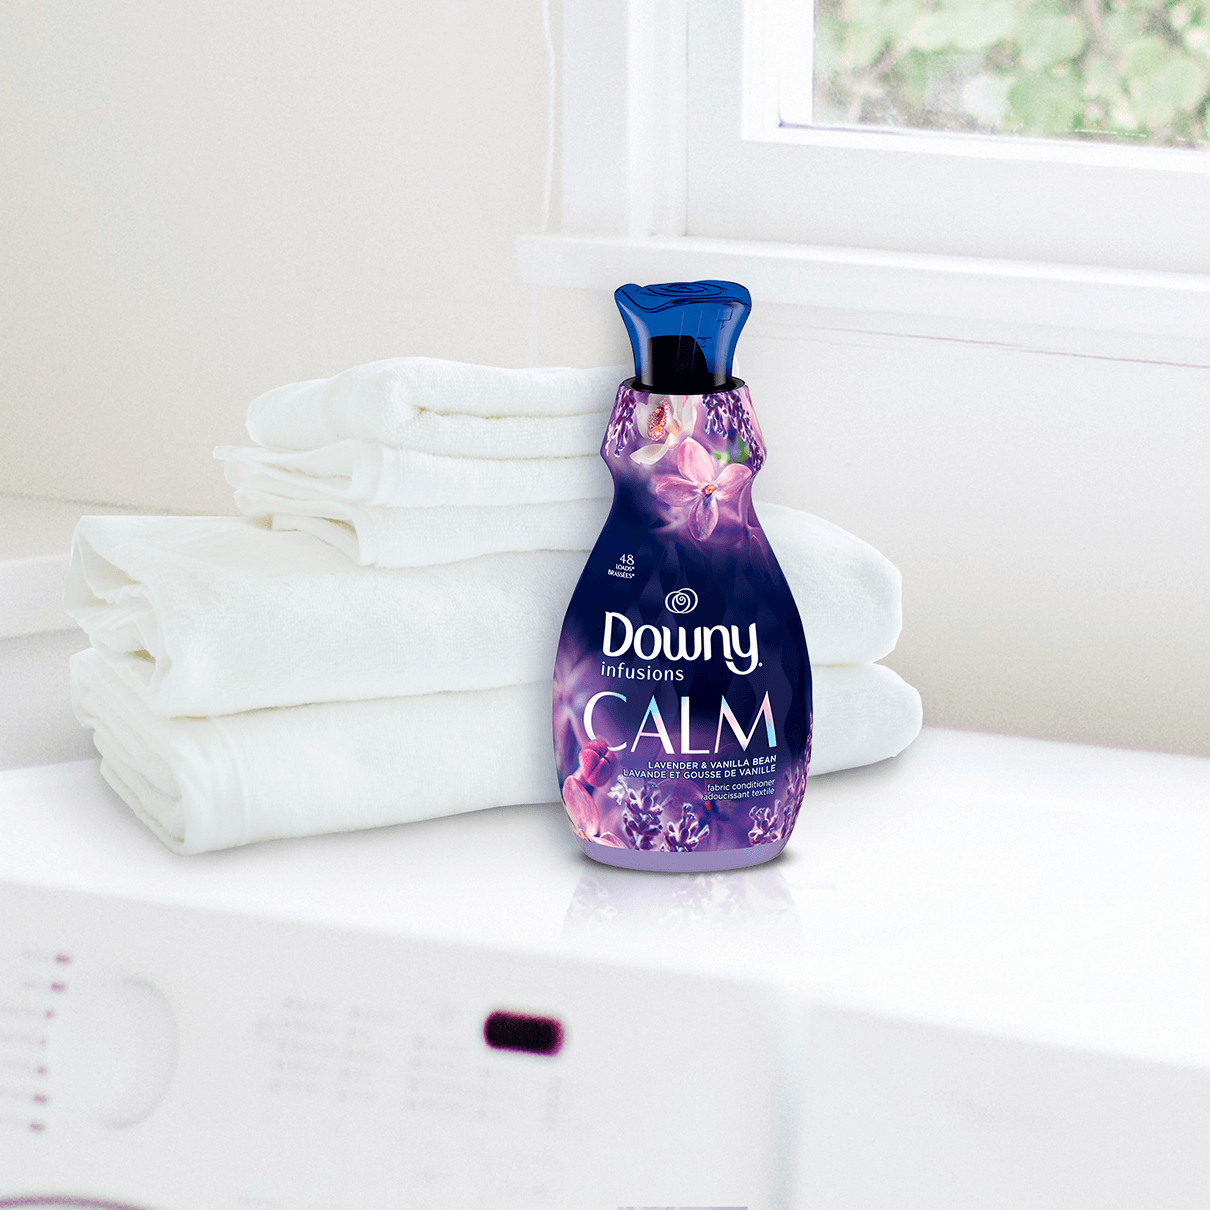 Downy Wrinkle Guard Liquid Fabric Conditioner